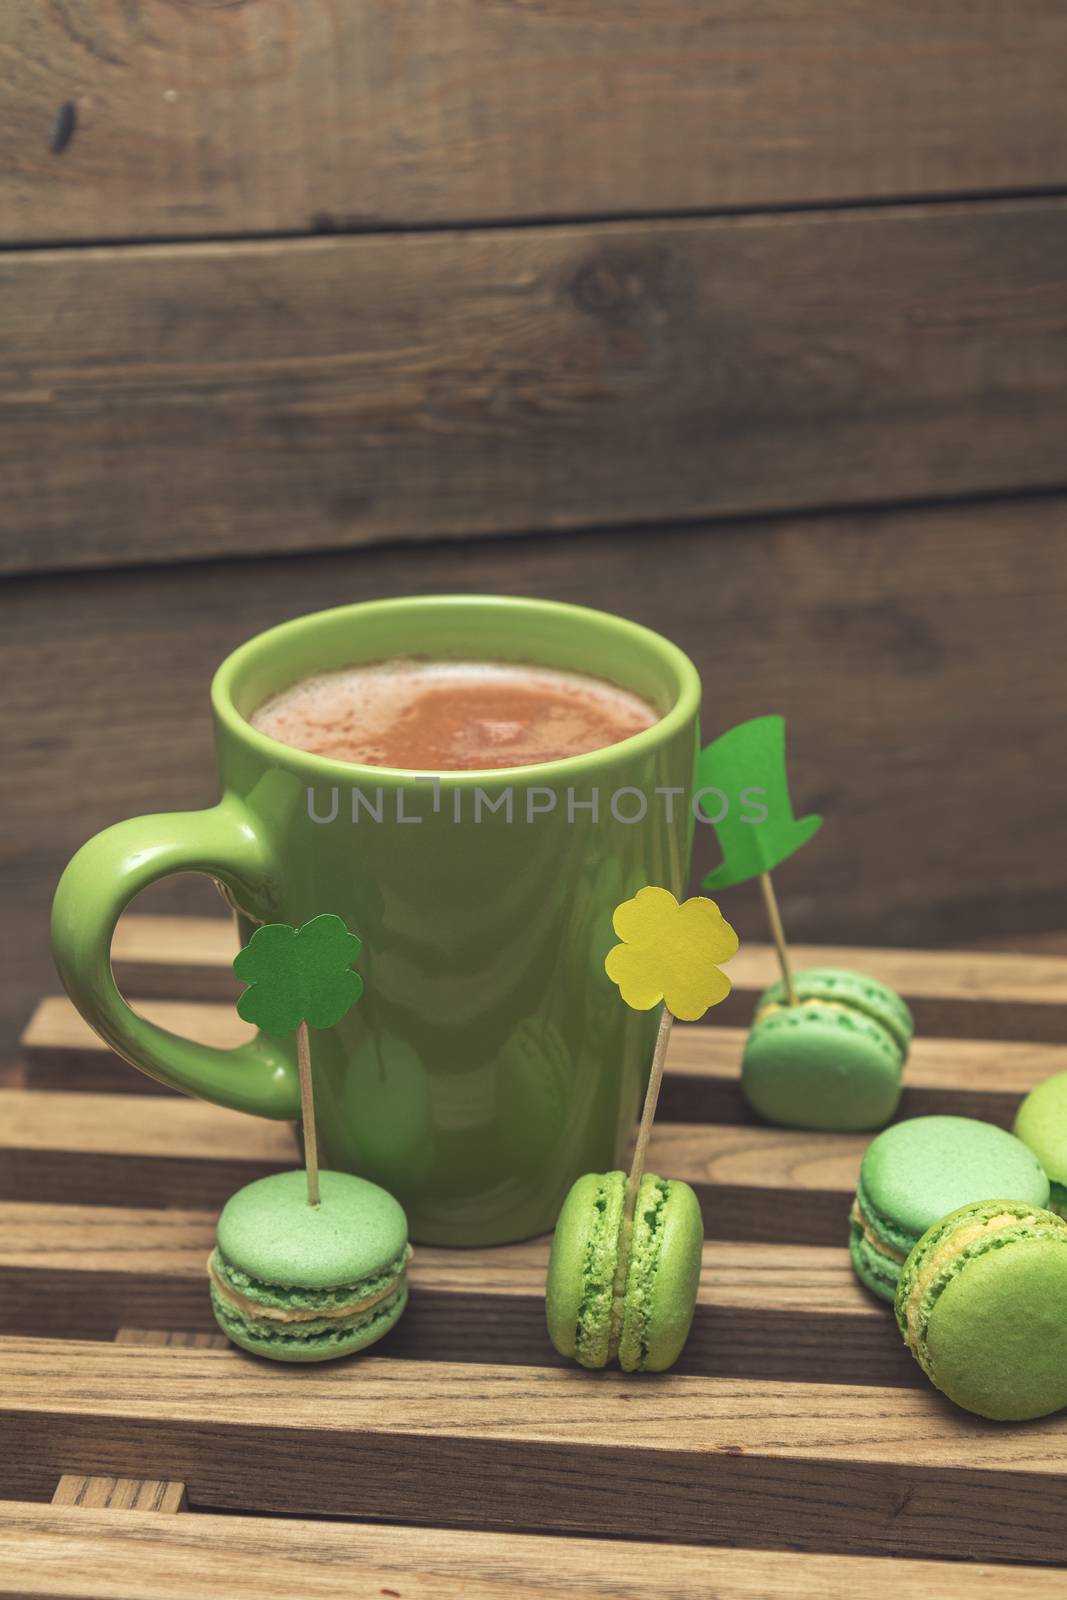 Hot cocoa in green cup and green macaroon cookies scattered on the wooden surface with St. Patrick’s Day attributes. Tonted photo. Shallow depth of field. Copy space